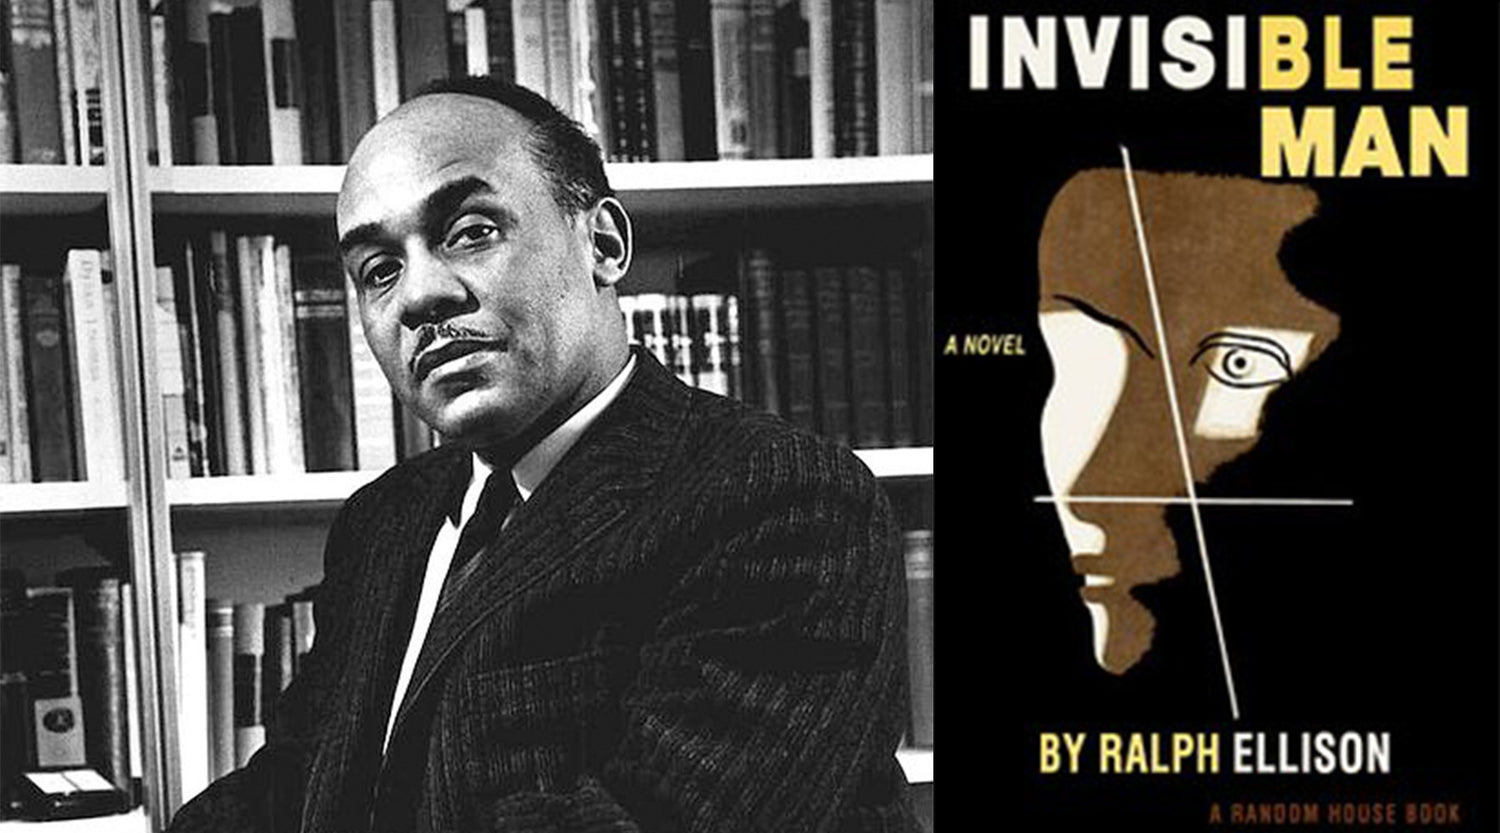 THE (IN)VISIBLE MAN: Ralph Ellison